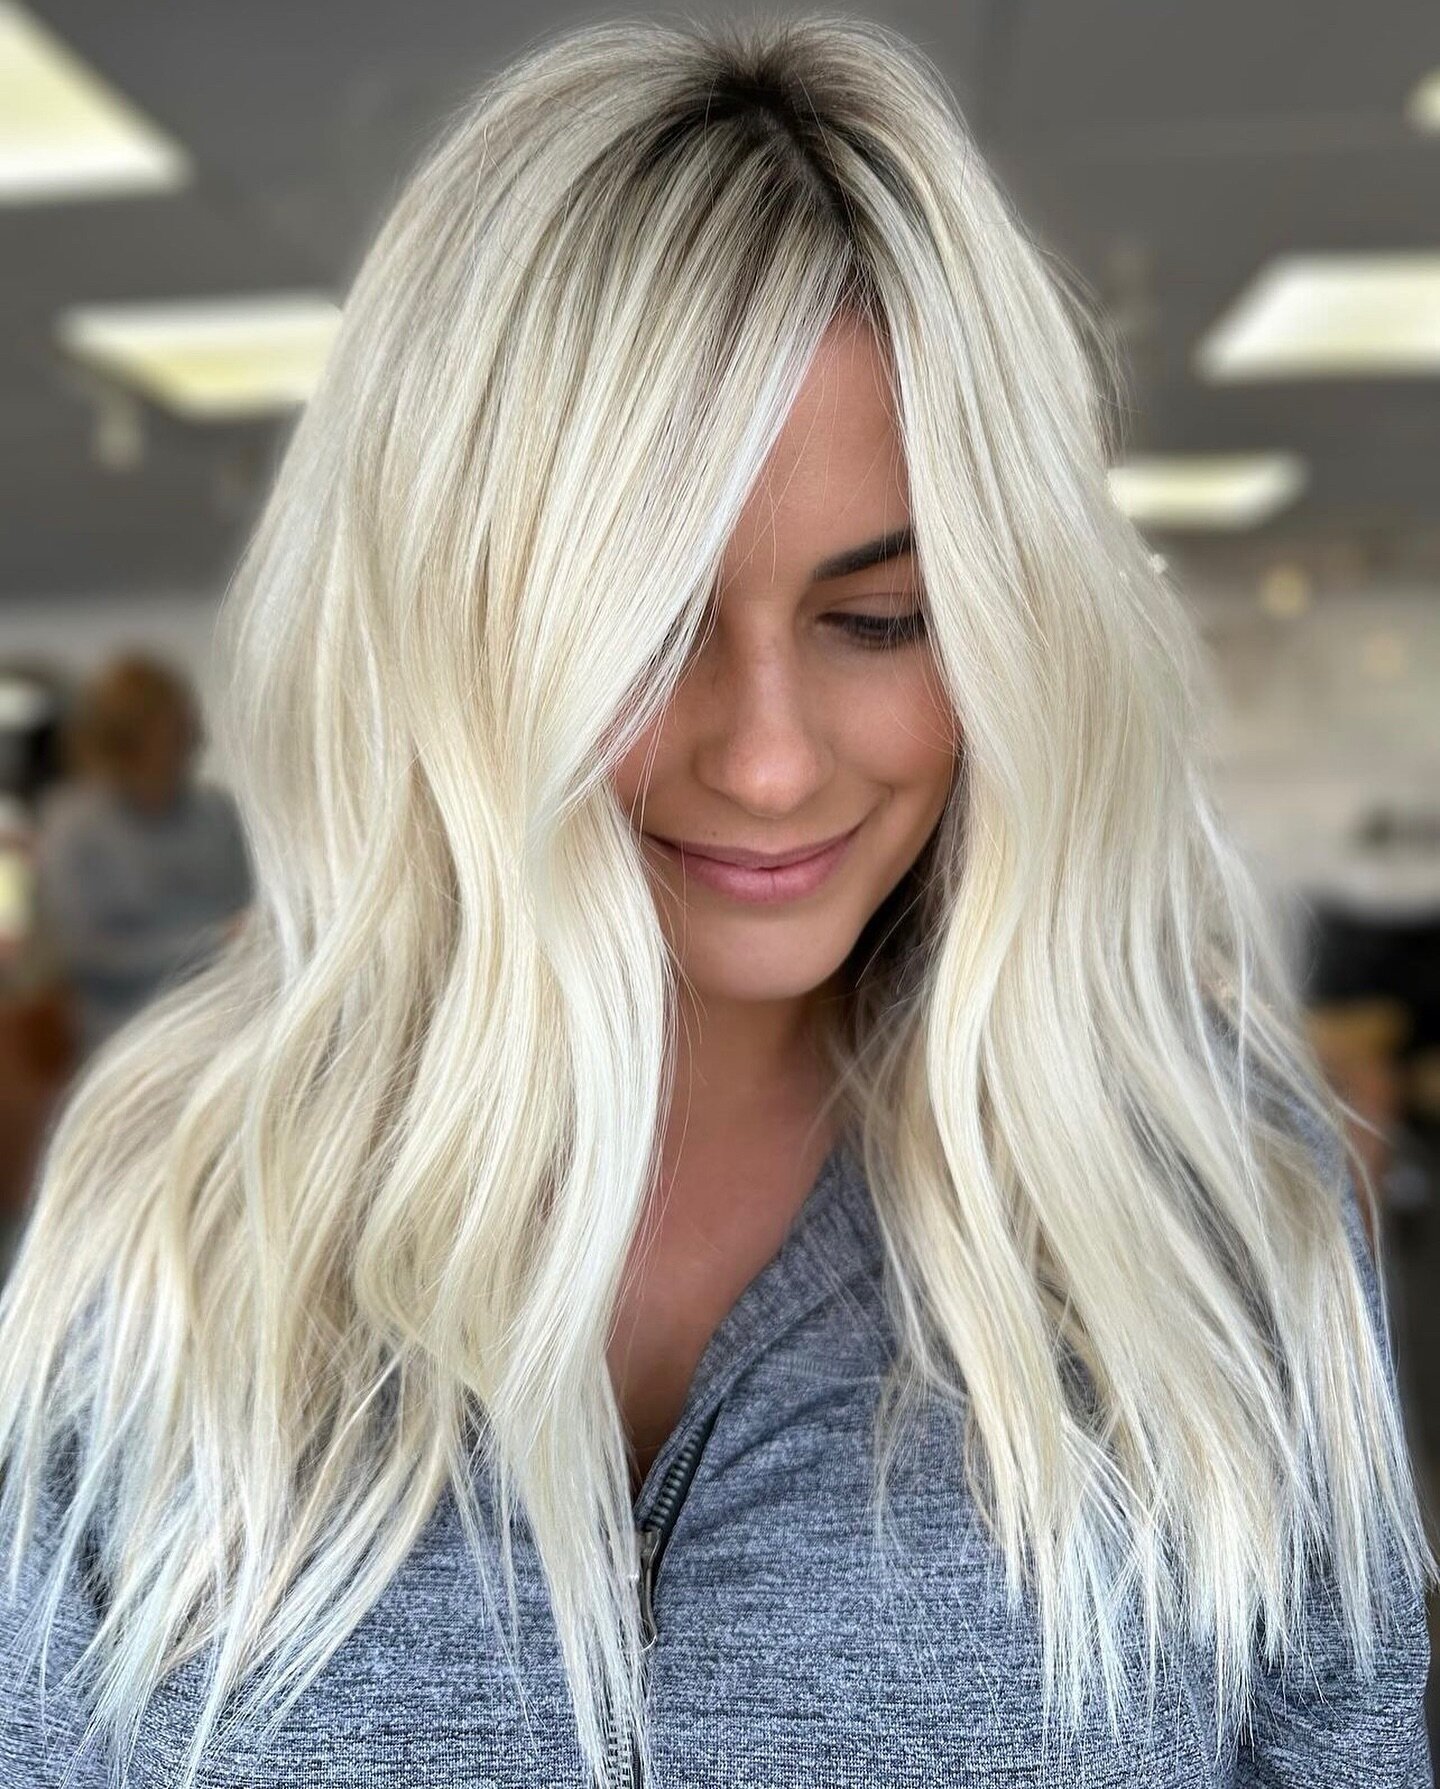 It&rsquo;s giving BRIGHT BLONDE ⚡️. @styledby_lexie

.
.

#beautyinfluencer #sdinfluencer #sdblogger #influencer #sandiego #sandiegohair #sandiegohairstylist #hairartist 
#balayagespecialist #handtiedextensions #extensions #sdhairstylist #sdhair #bal